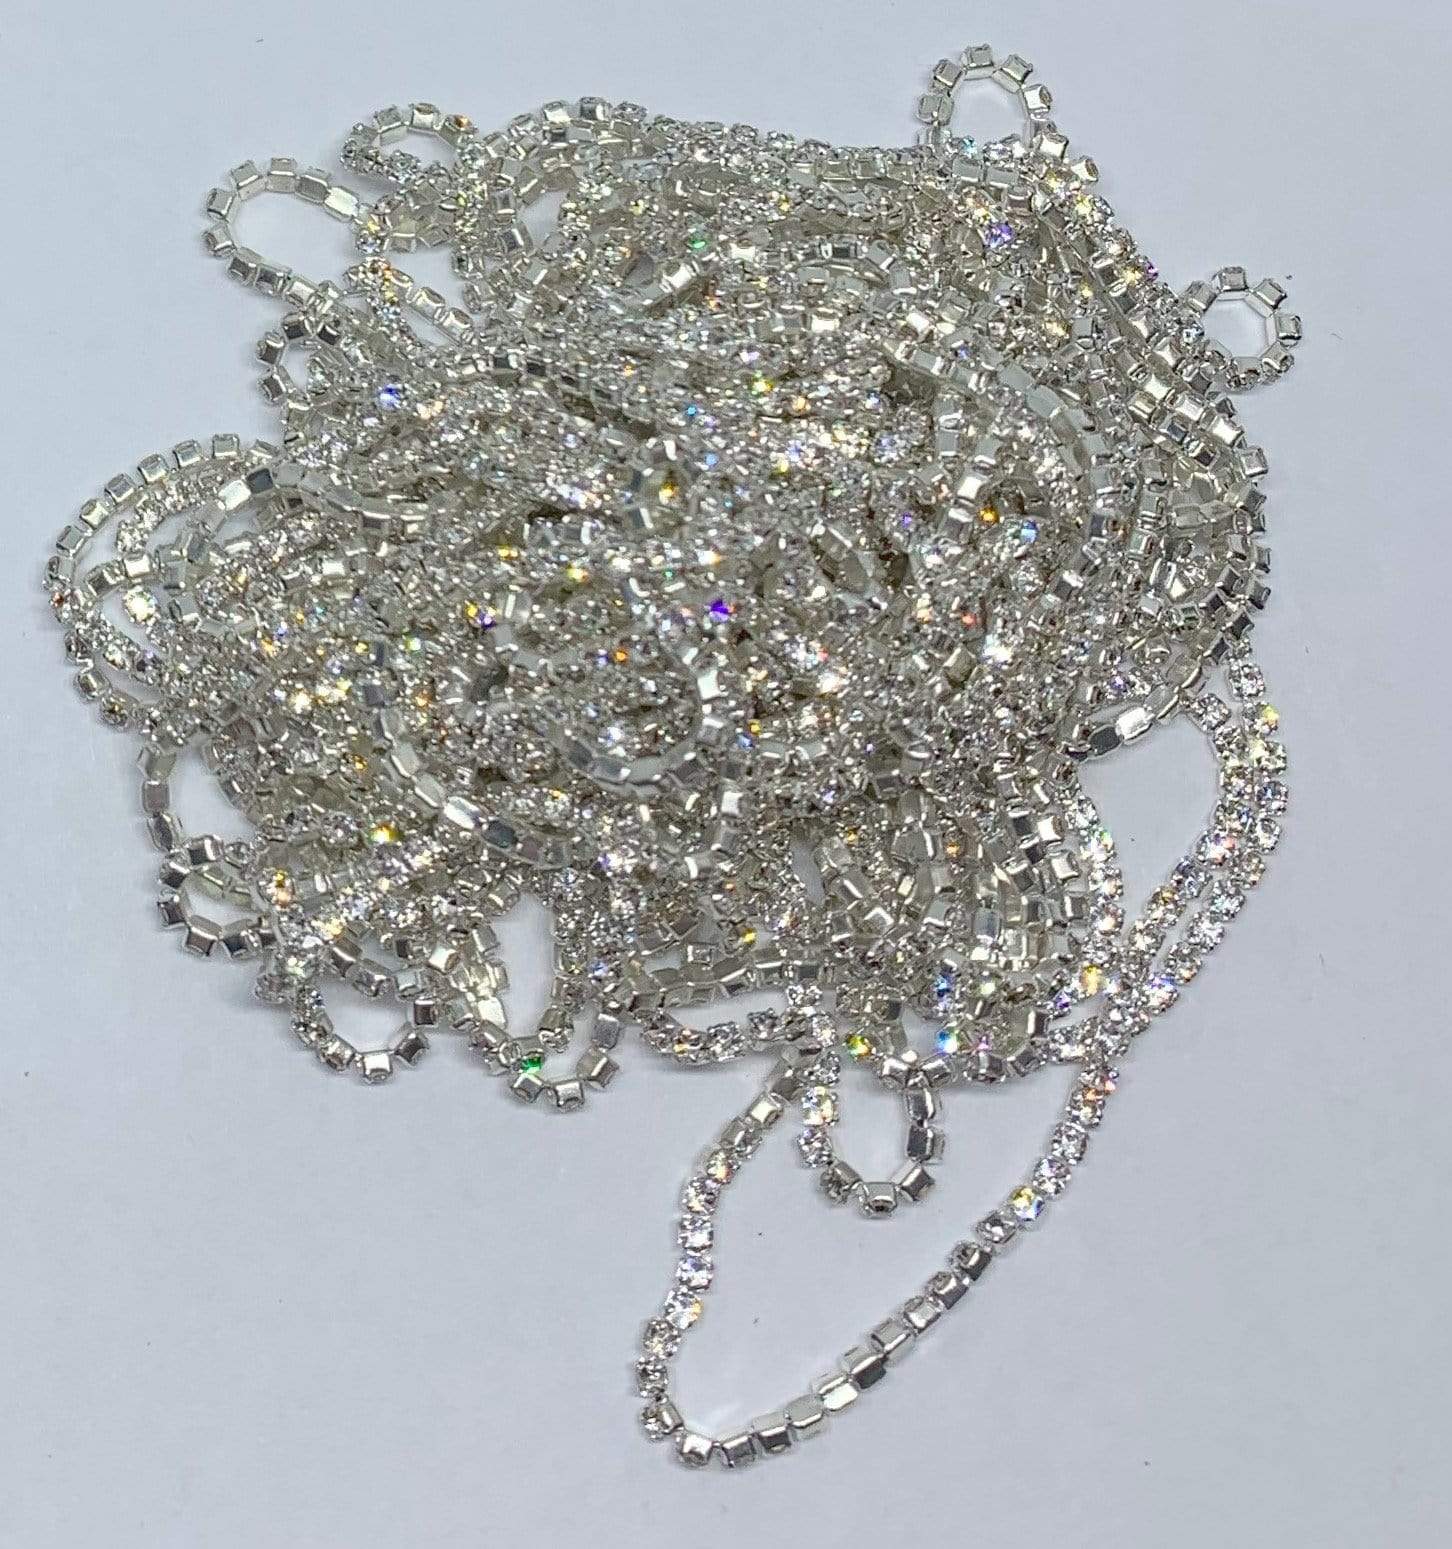 Sundaylace Creations & Bling SS4 Metal Rhinestone Chain Ss4 Clear Silver Metal Rhinestone Chain, Dense Chain, 33" inches